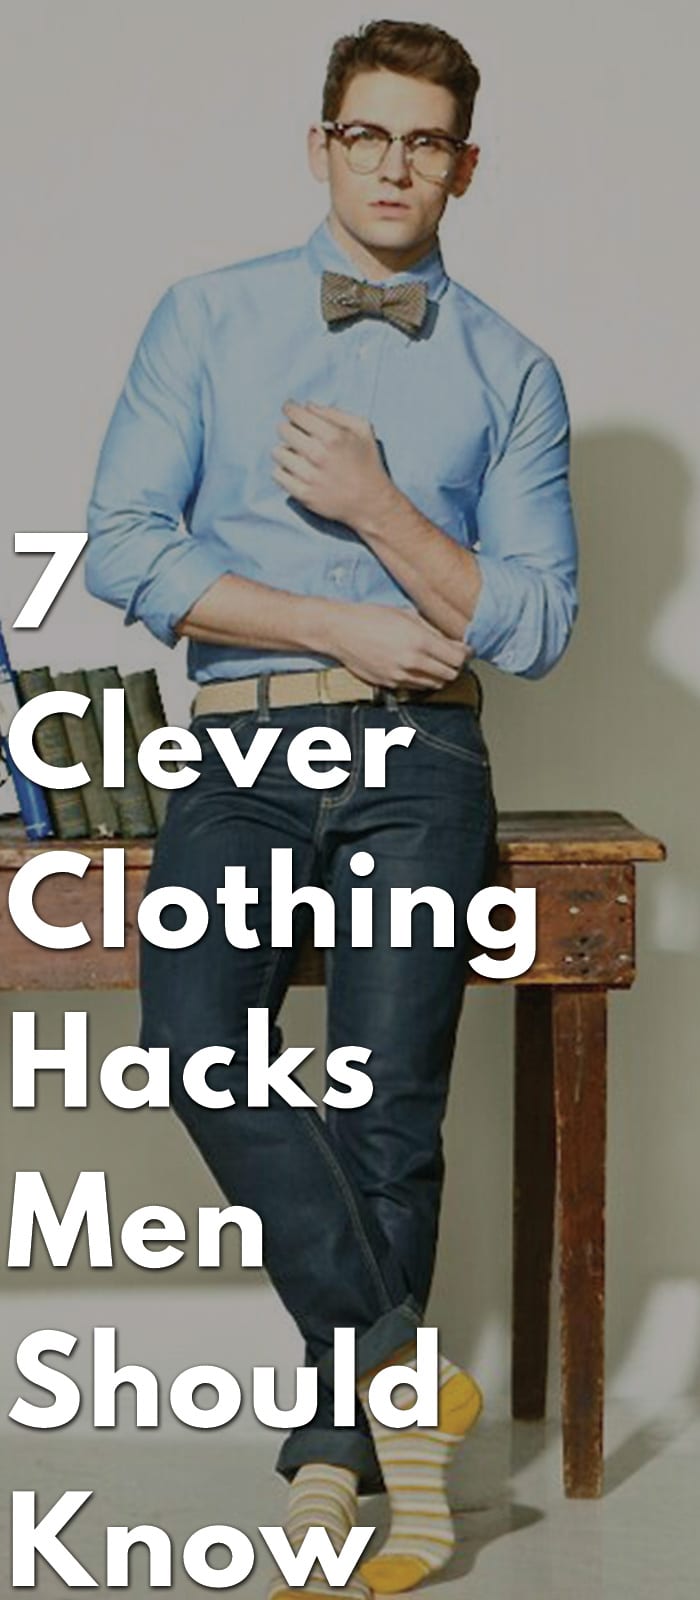 7-Clever-Clothing-Hacks-Men-Should-Know..